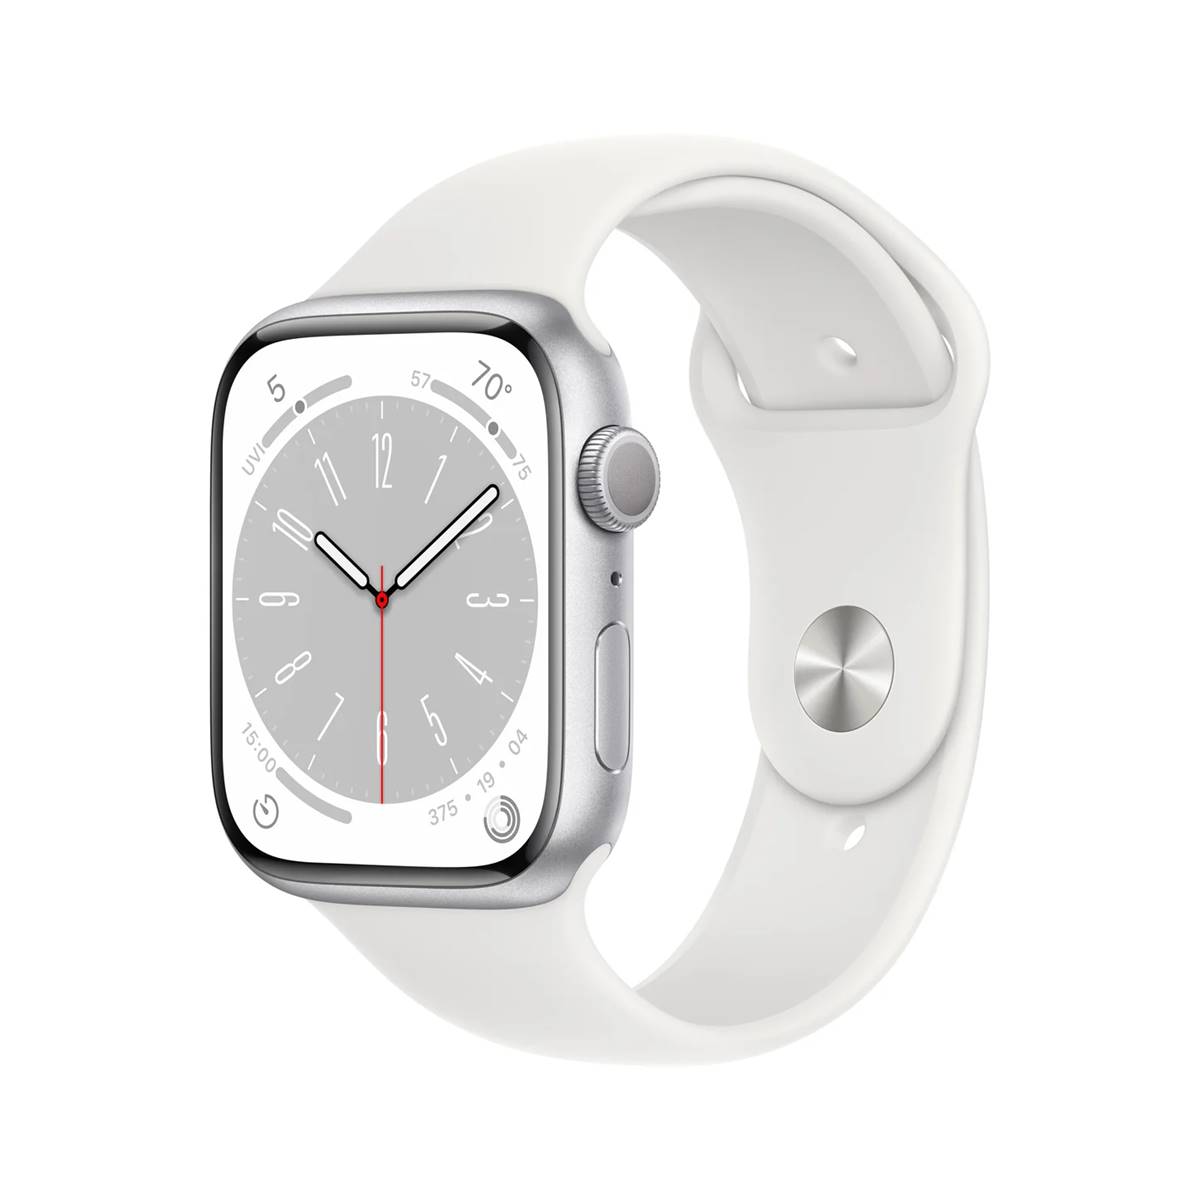 Apple Watch Series 8 Aluminum Released on 2022, September 16, 32g (41mm), 38.8g (45mm), 10.7mm thickness, watchOS 9.0, up to watchOS 10.3, 32GB storage, no card slot, 1.9"484x396 pixels, NO, 1GB RAMApple S8, 308mAhLi-Ion